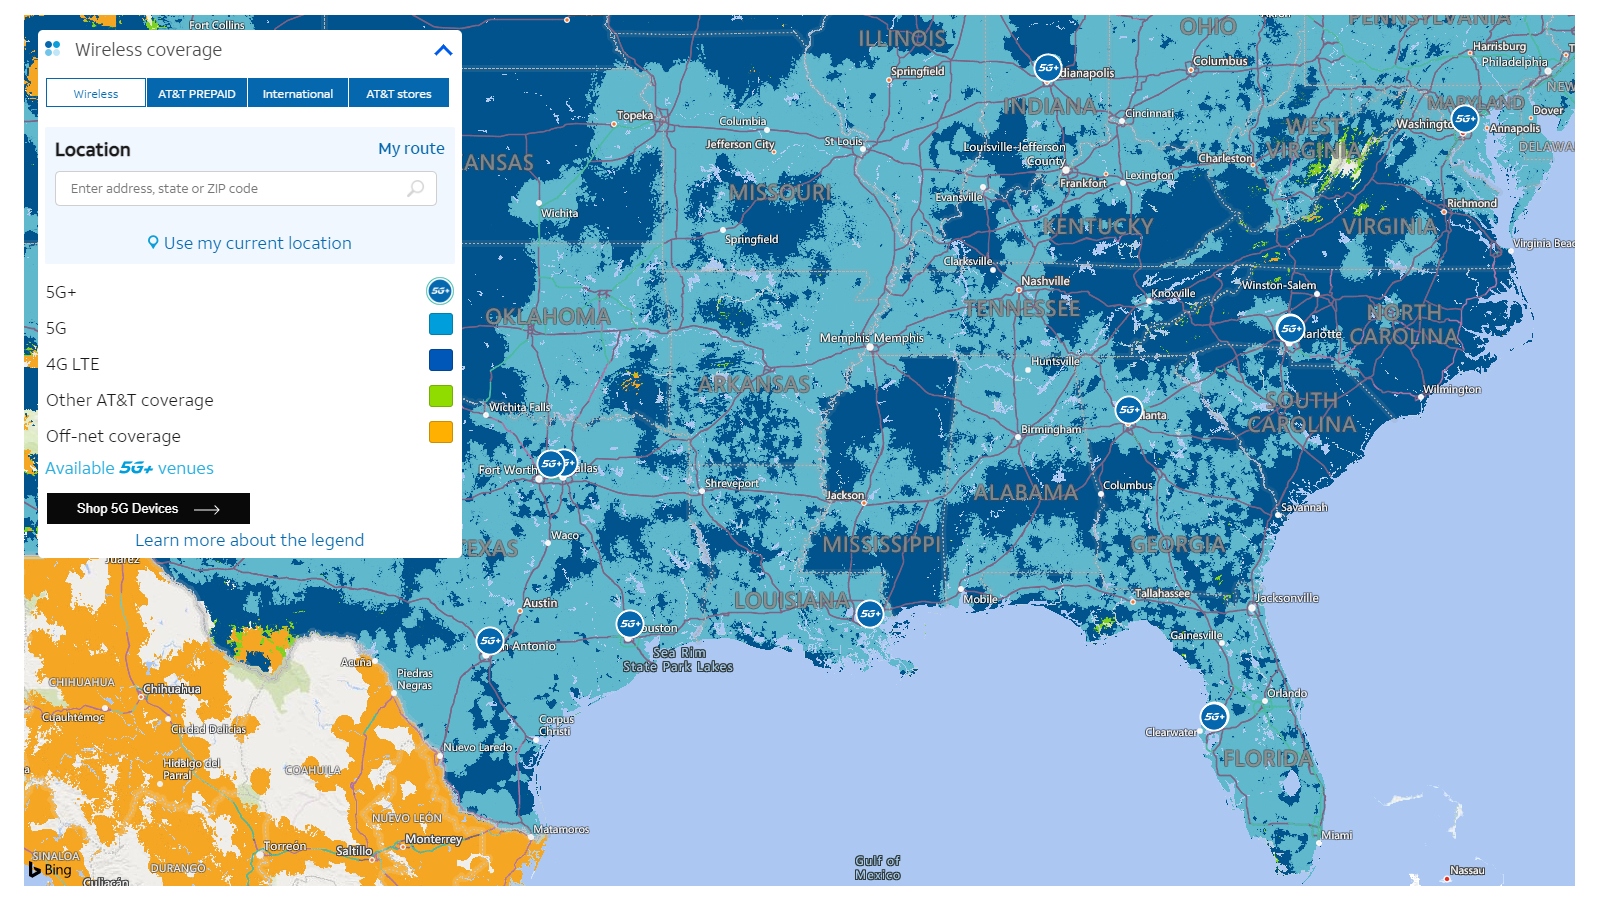 Cell phone coverage maps who has the best network in America? Top